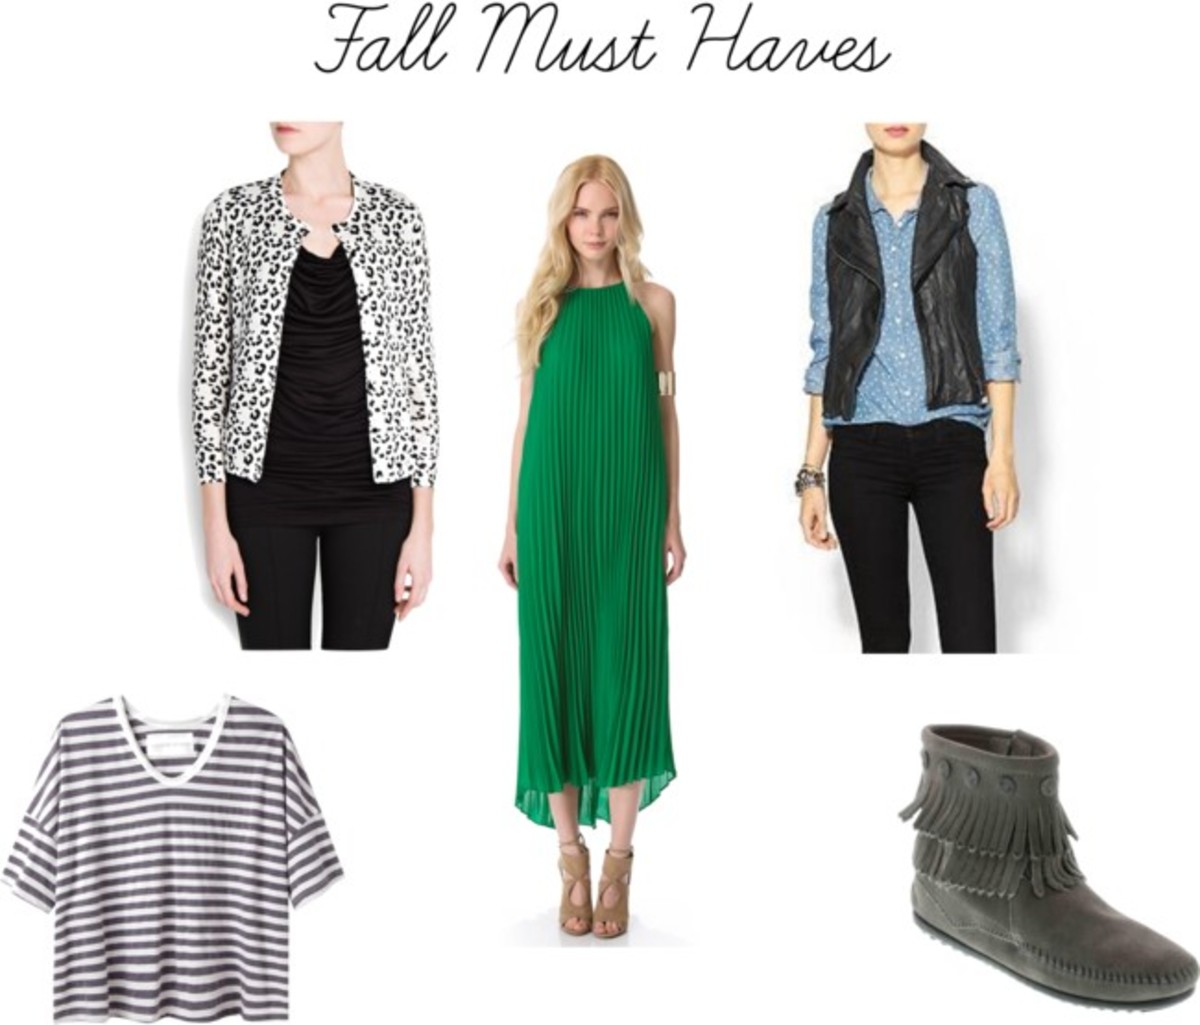 Fall Fashion Must Haves